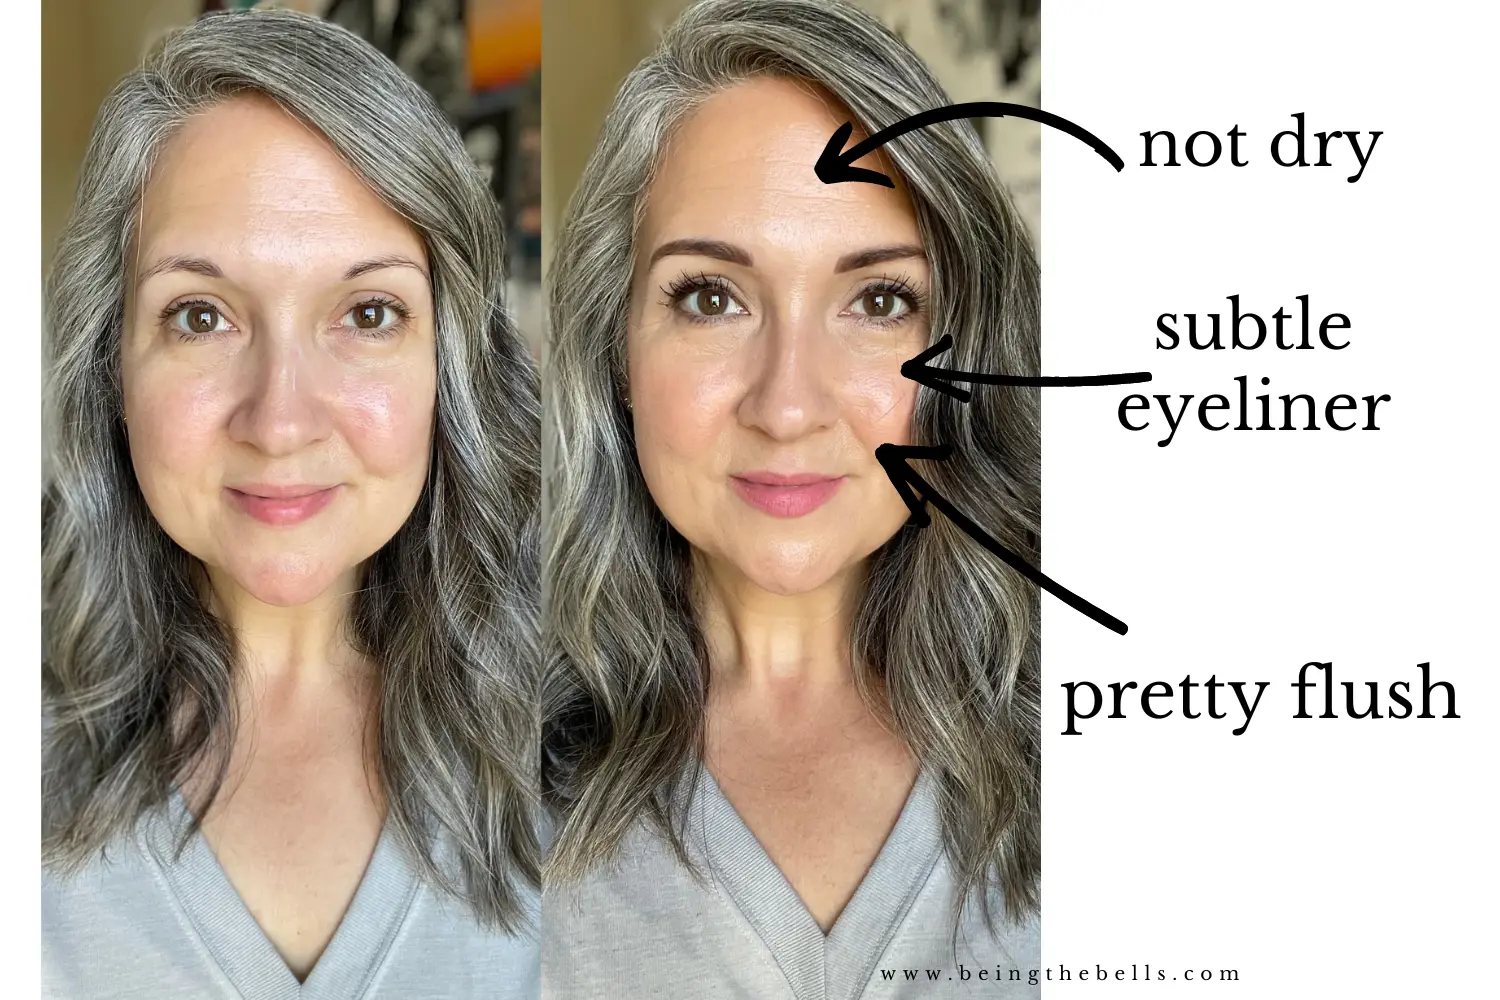 Look younger makeup